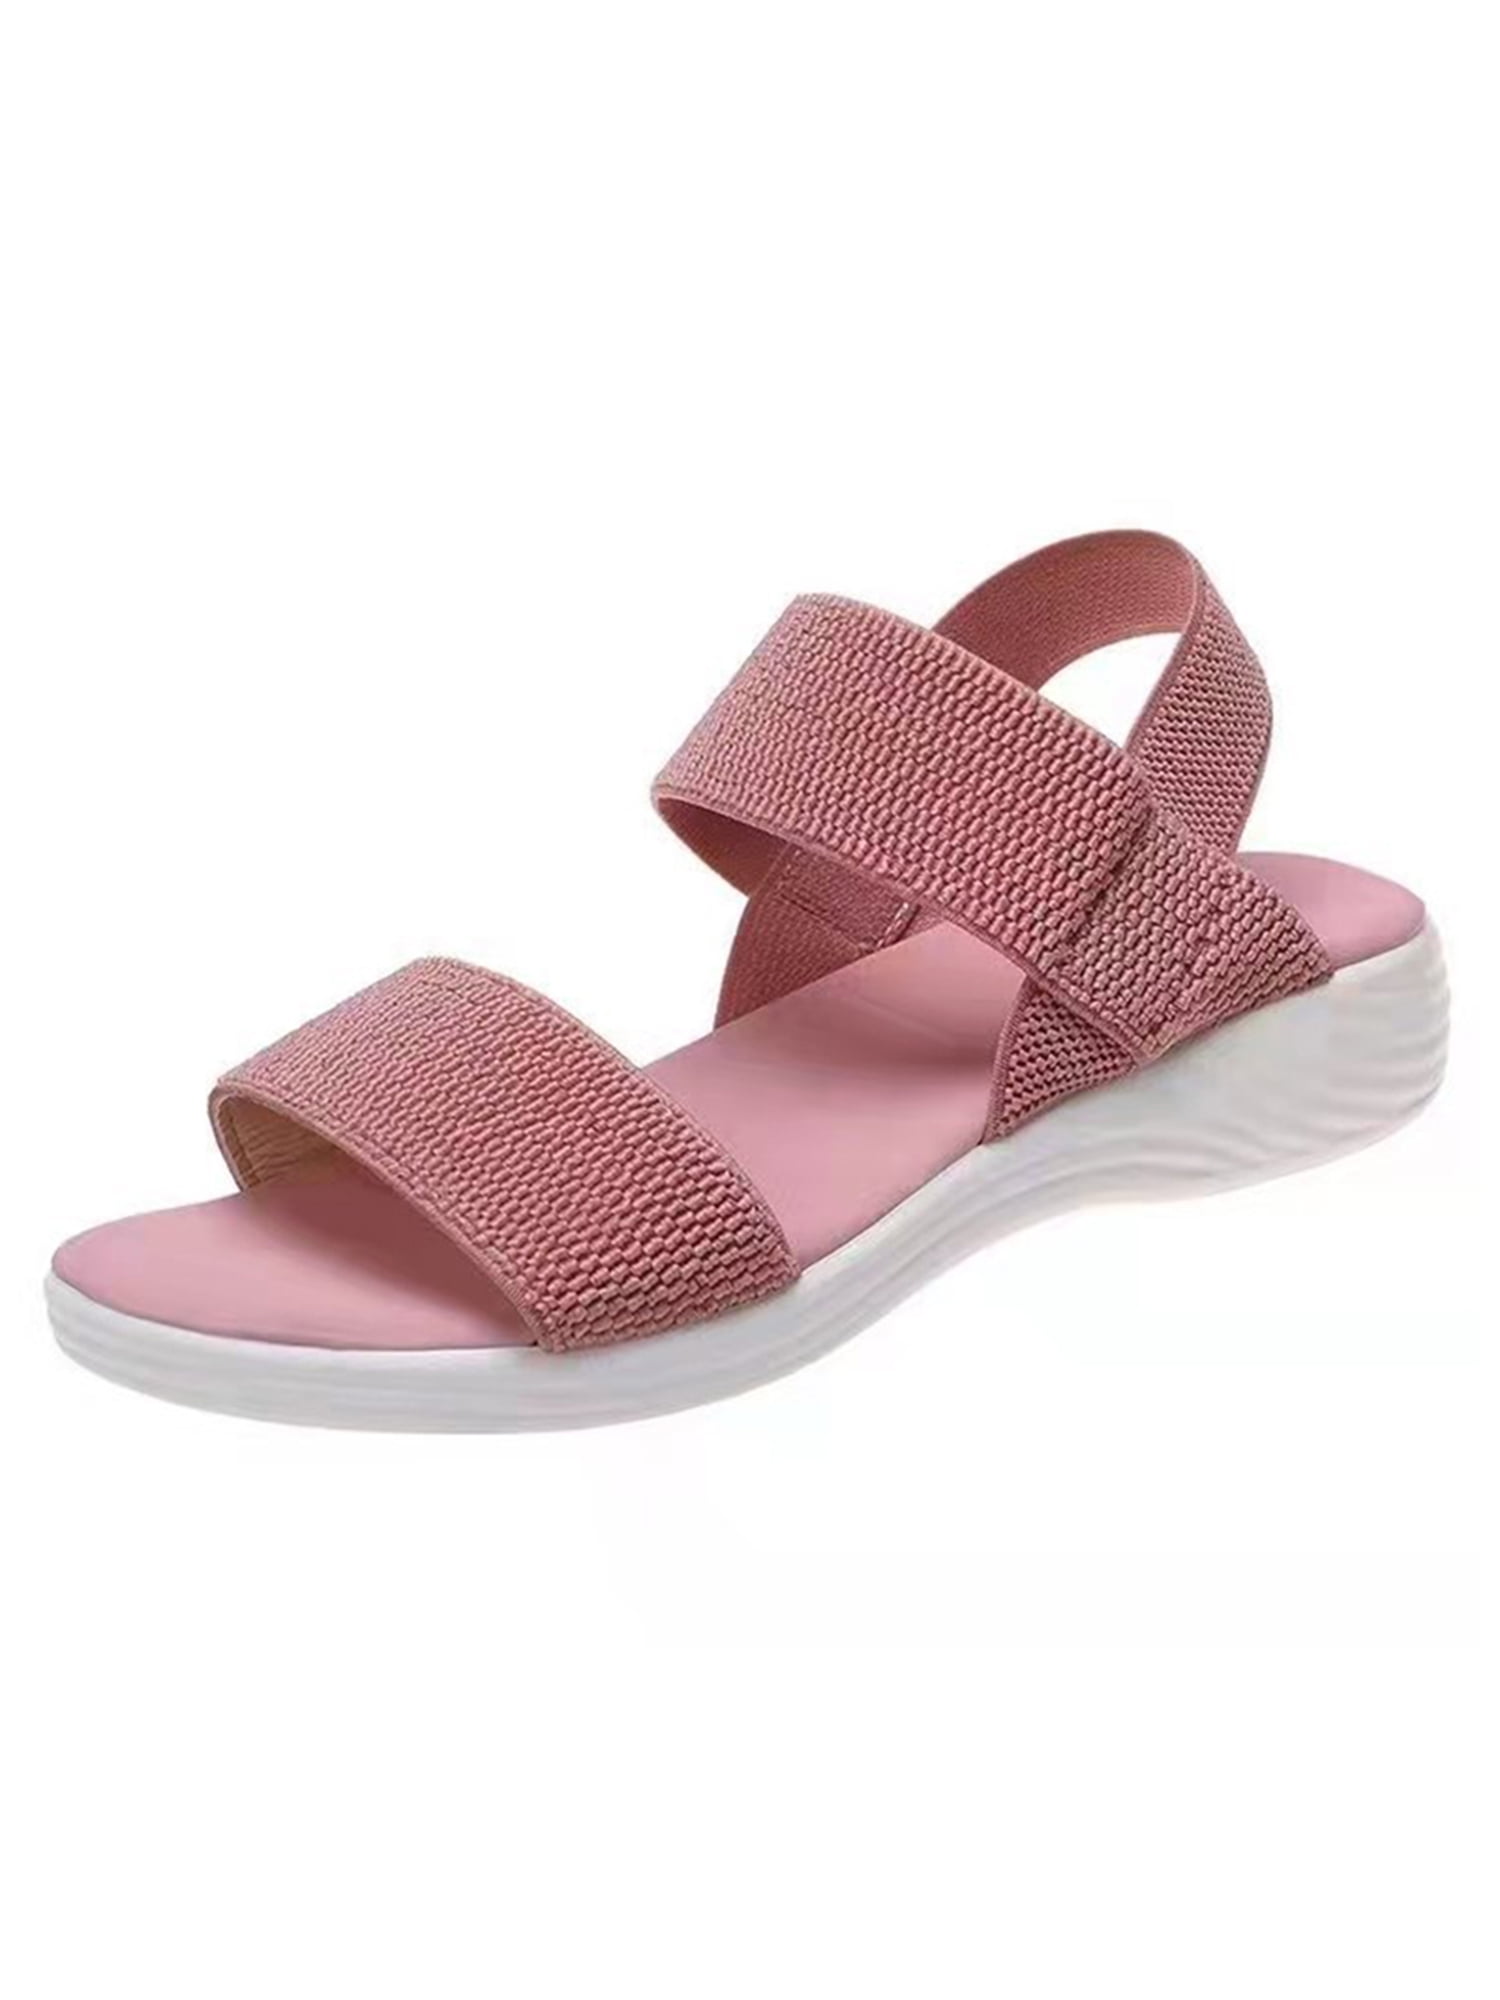 Wazshop Ladies Casual Shoes Low Wedge Flat Sandal Slip On Sandals Fashion Beach  Womens Summer Ankle Strap Pink 7.5 